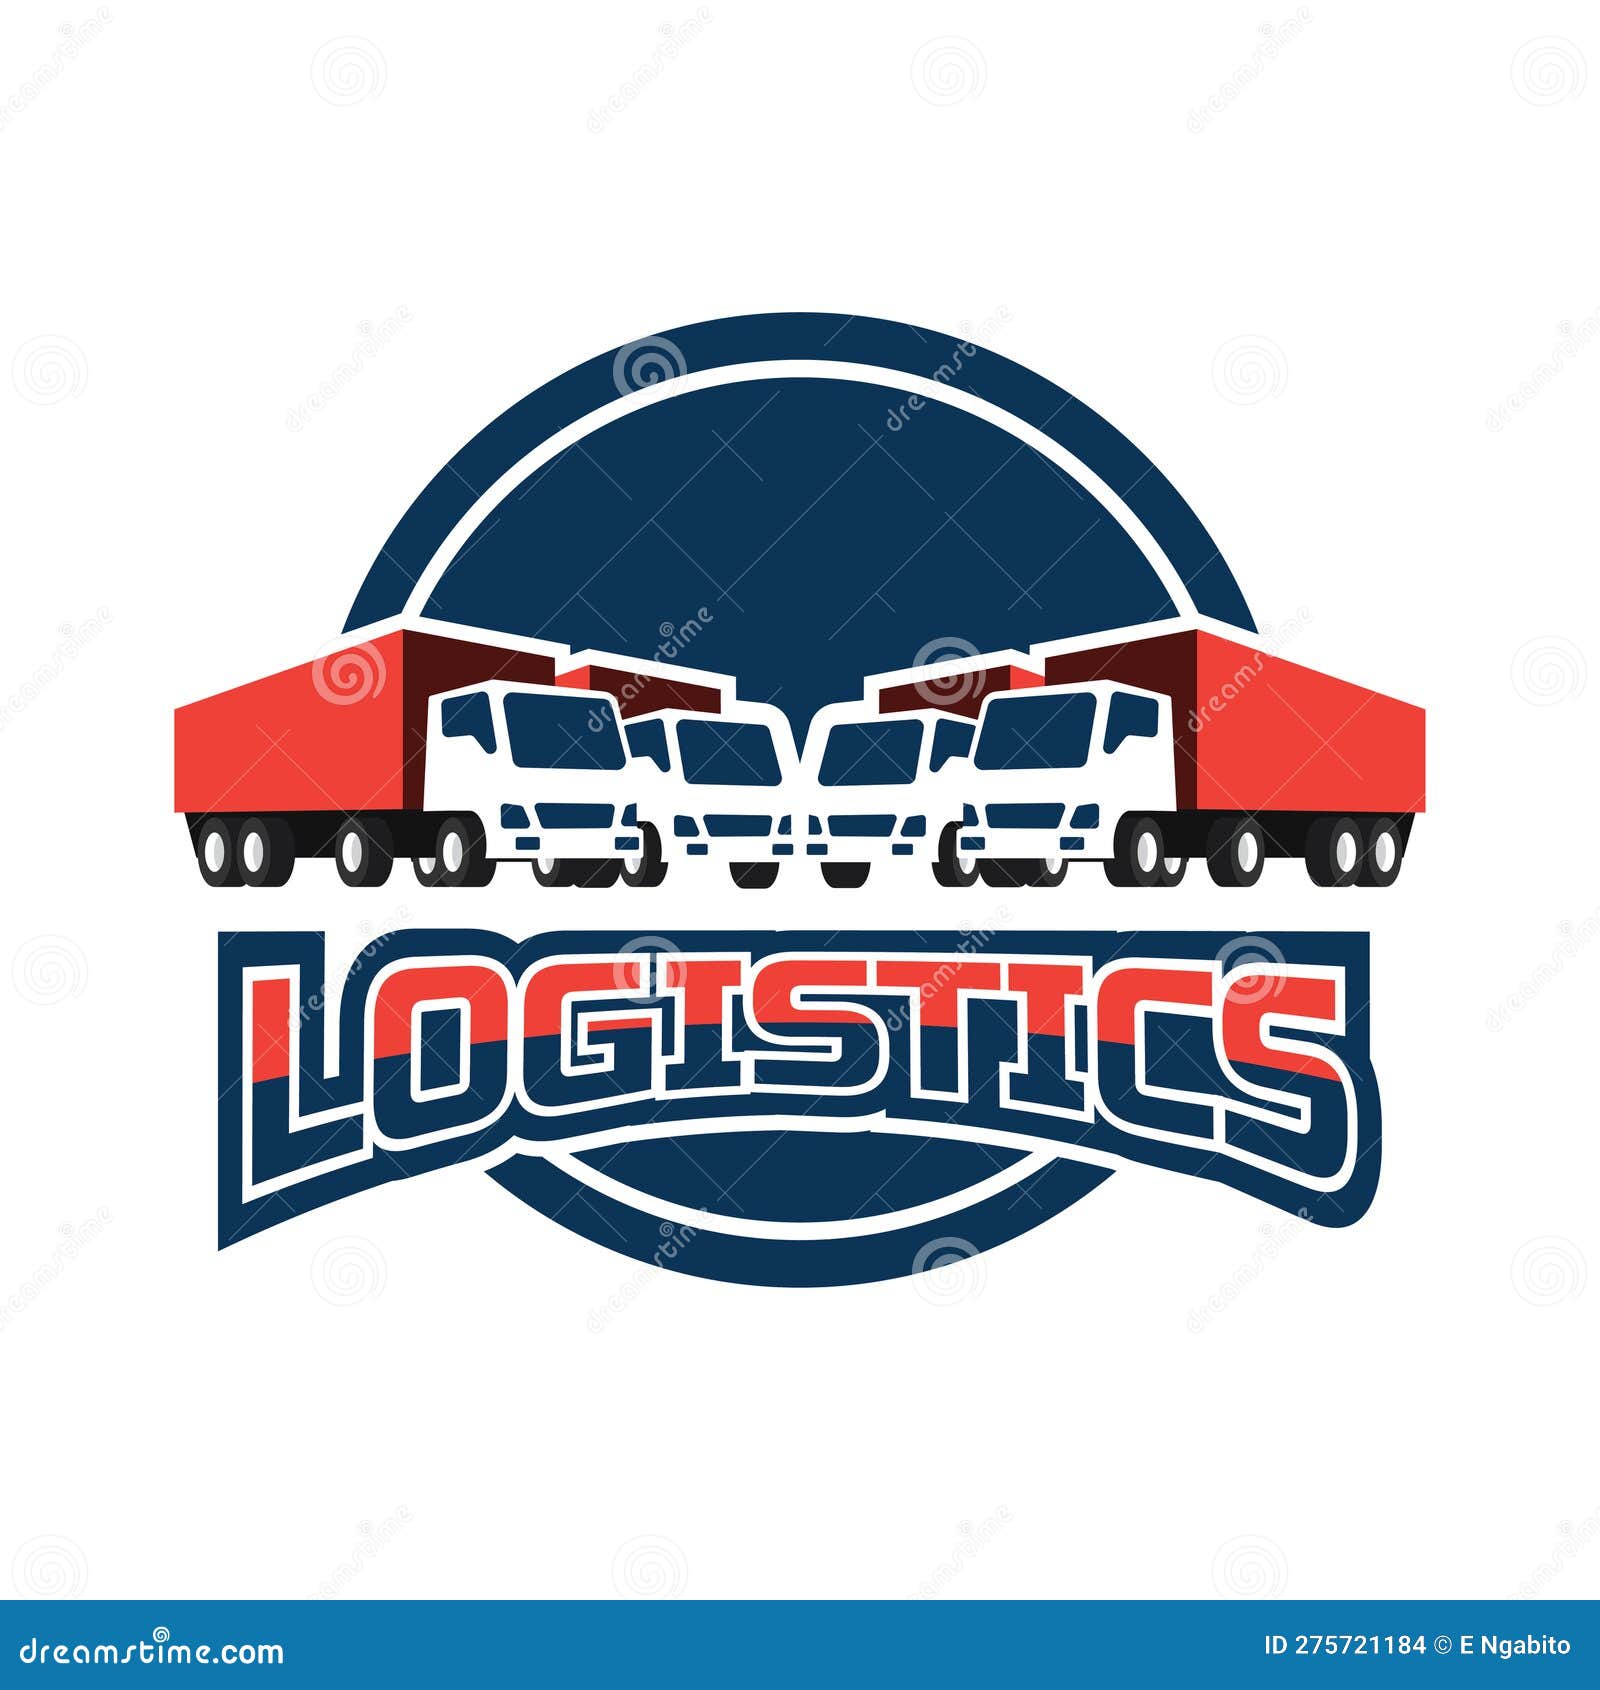 Shipping Logistics Insignia Isolated on White Background, Vector ...